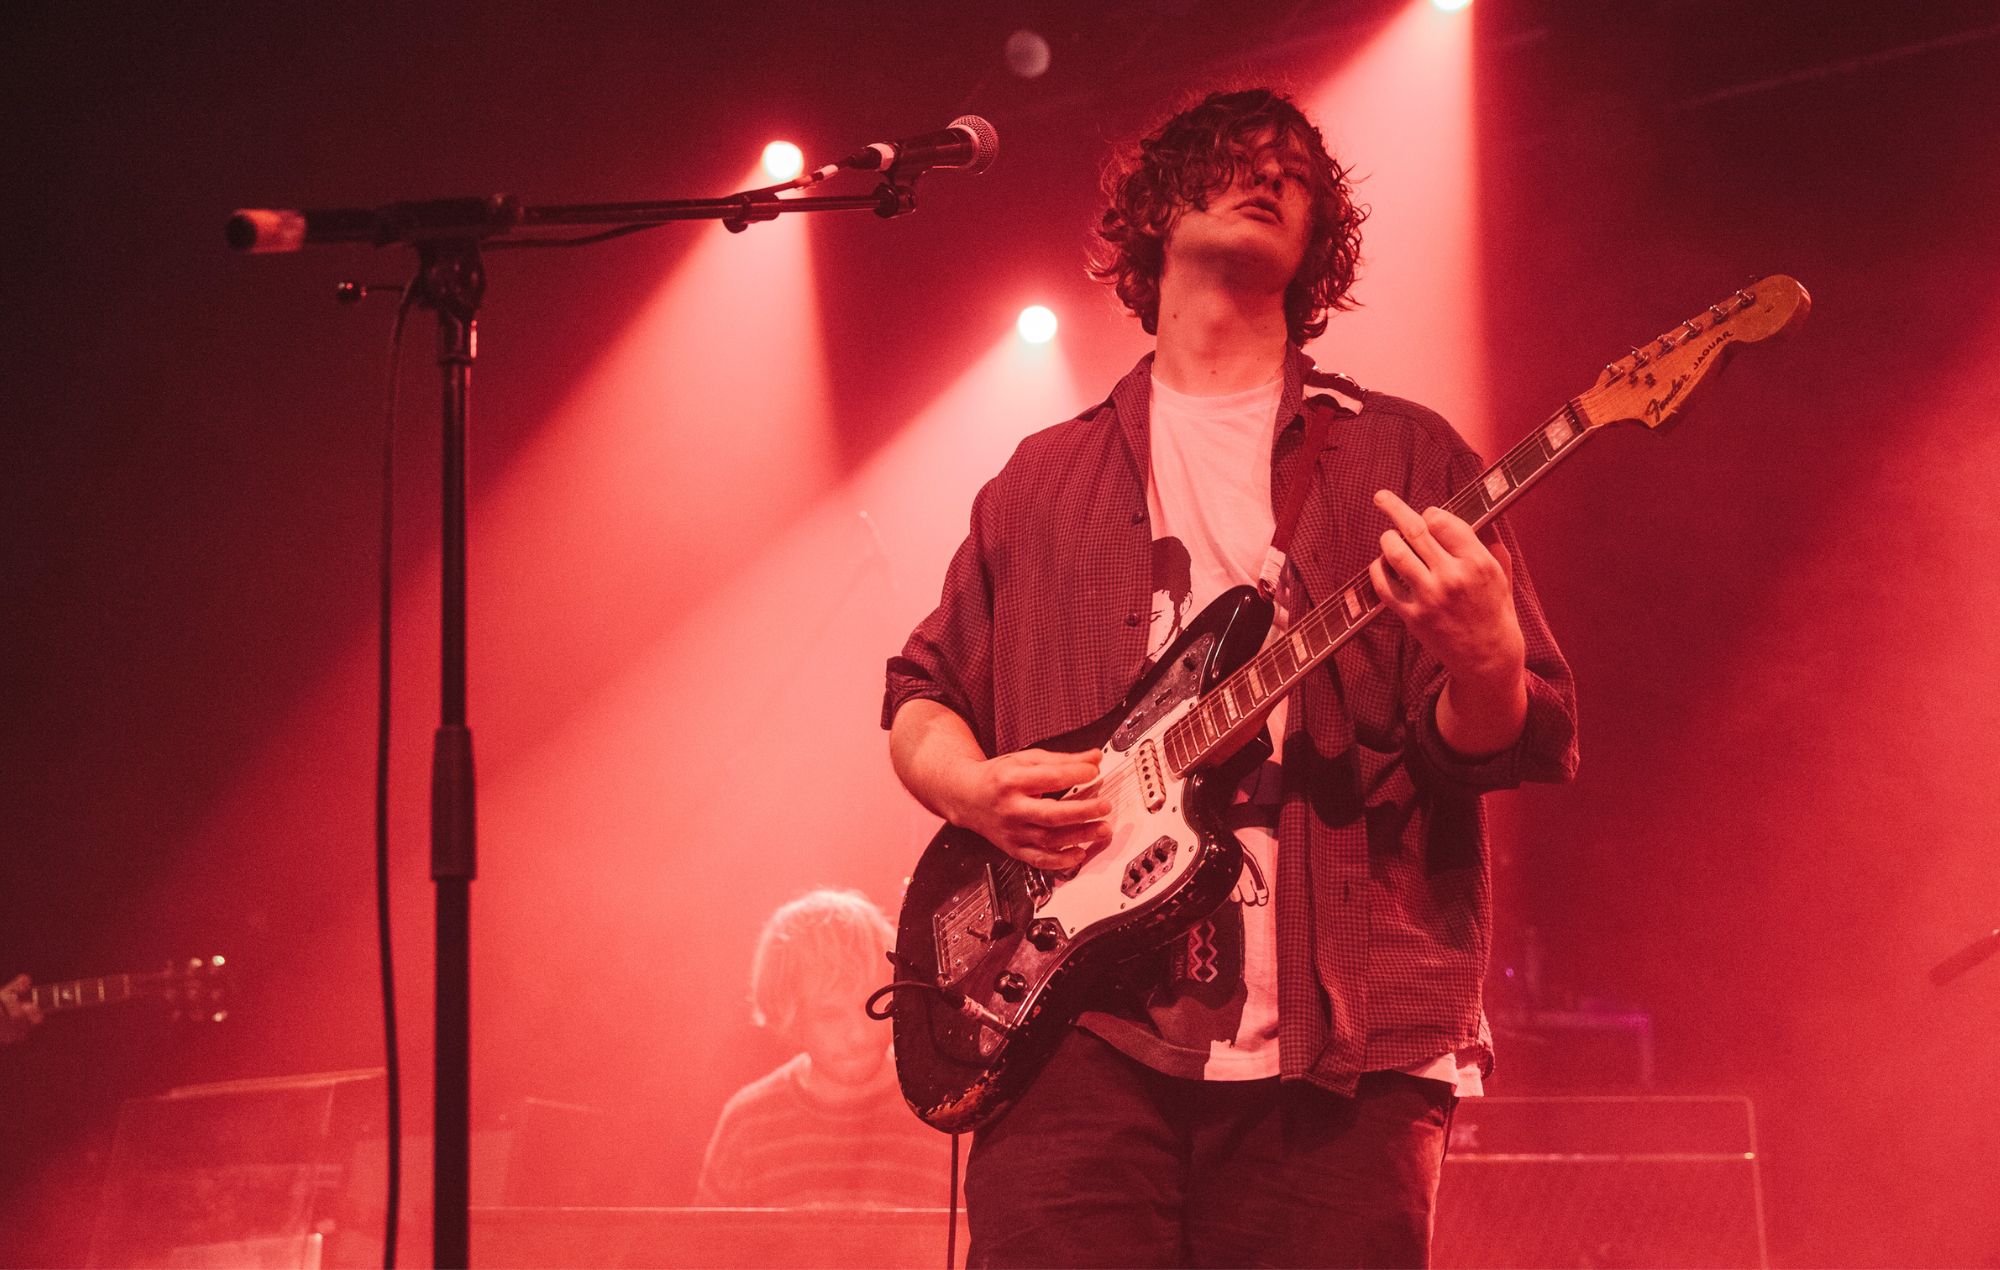 Bill Ryder-Jones performs on stage at Electric Brixton in London, England.